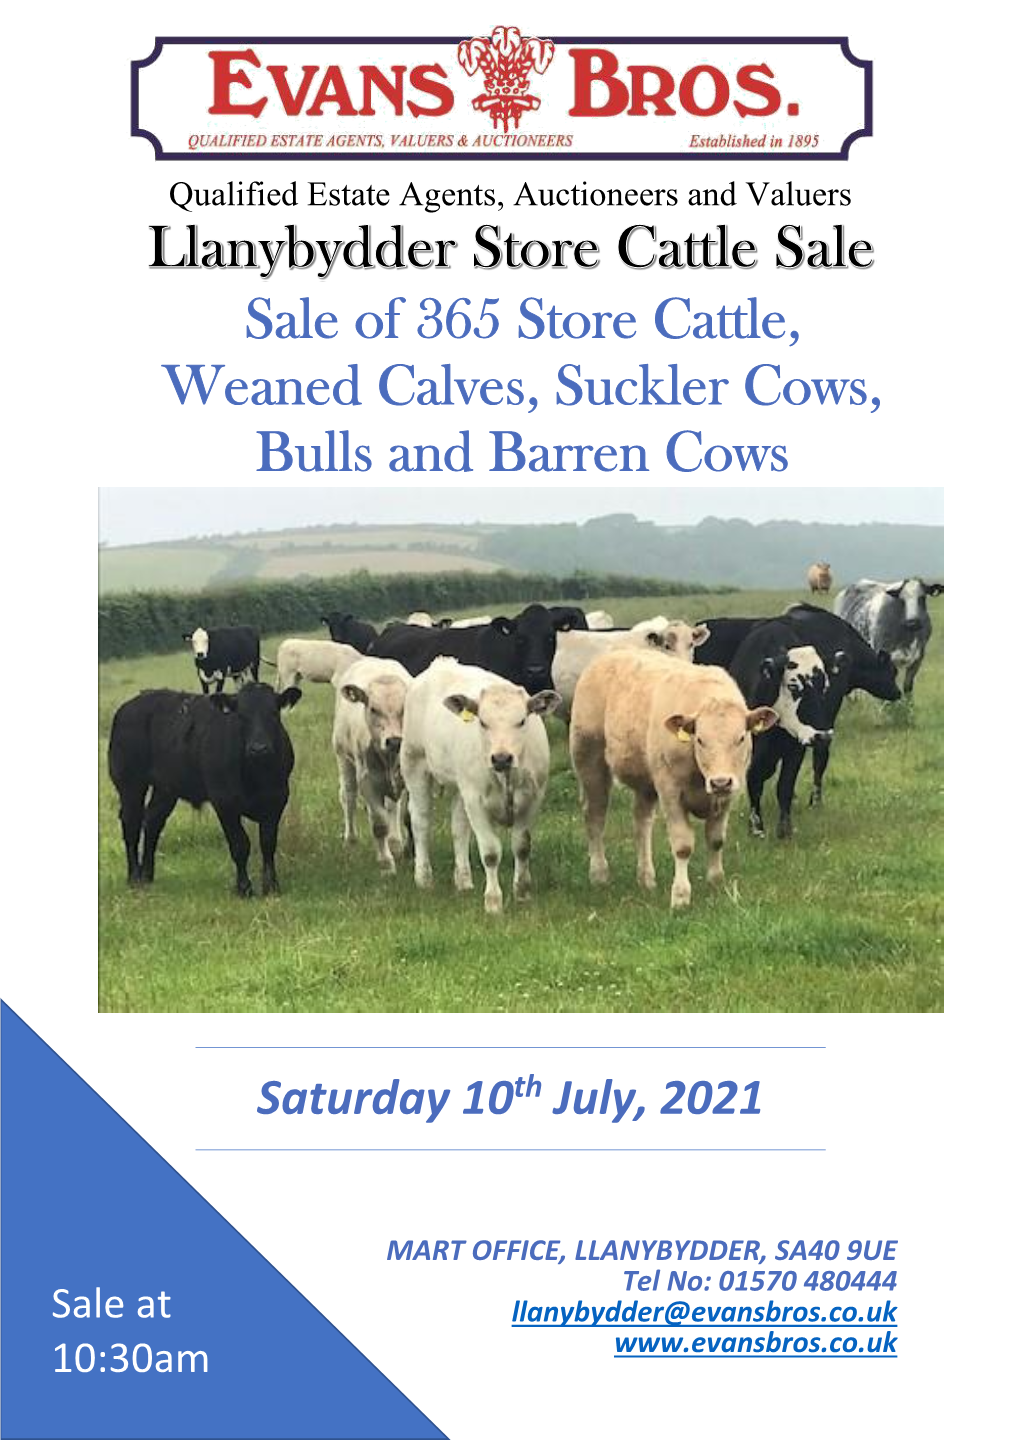 Sale of 365 Store Cattle, Weaned Calves, Suckler Cows, Bulls and Barren Cows